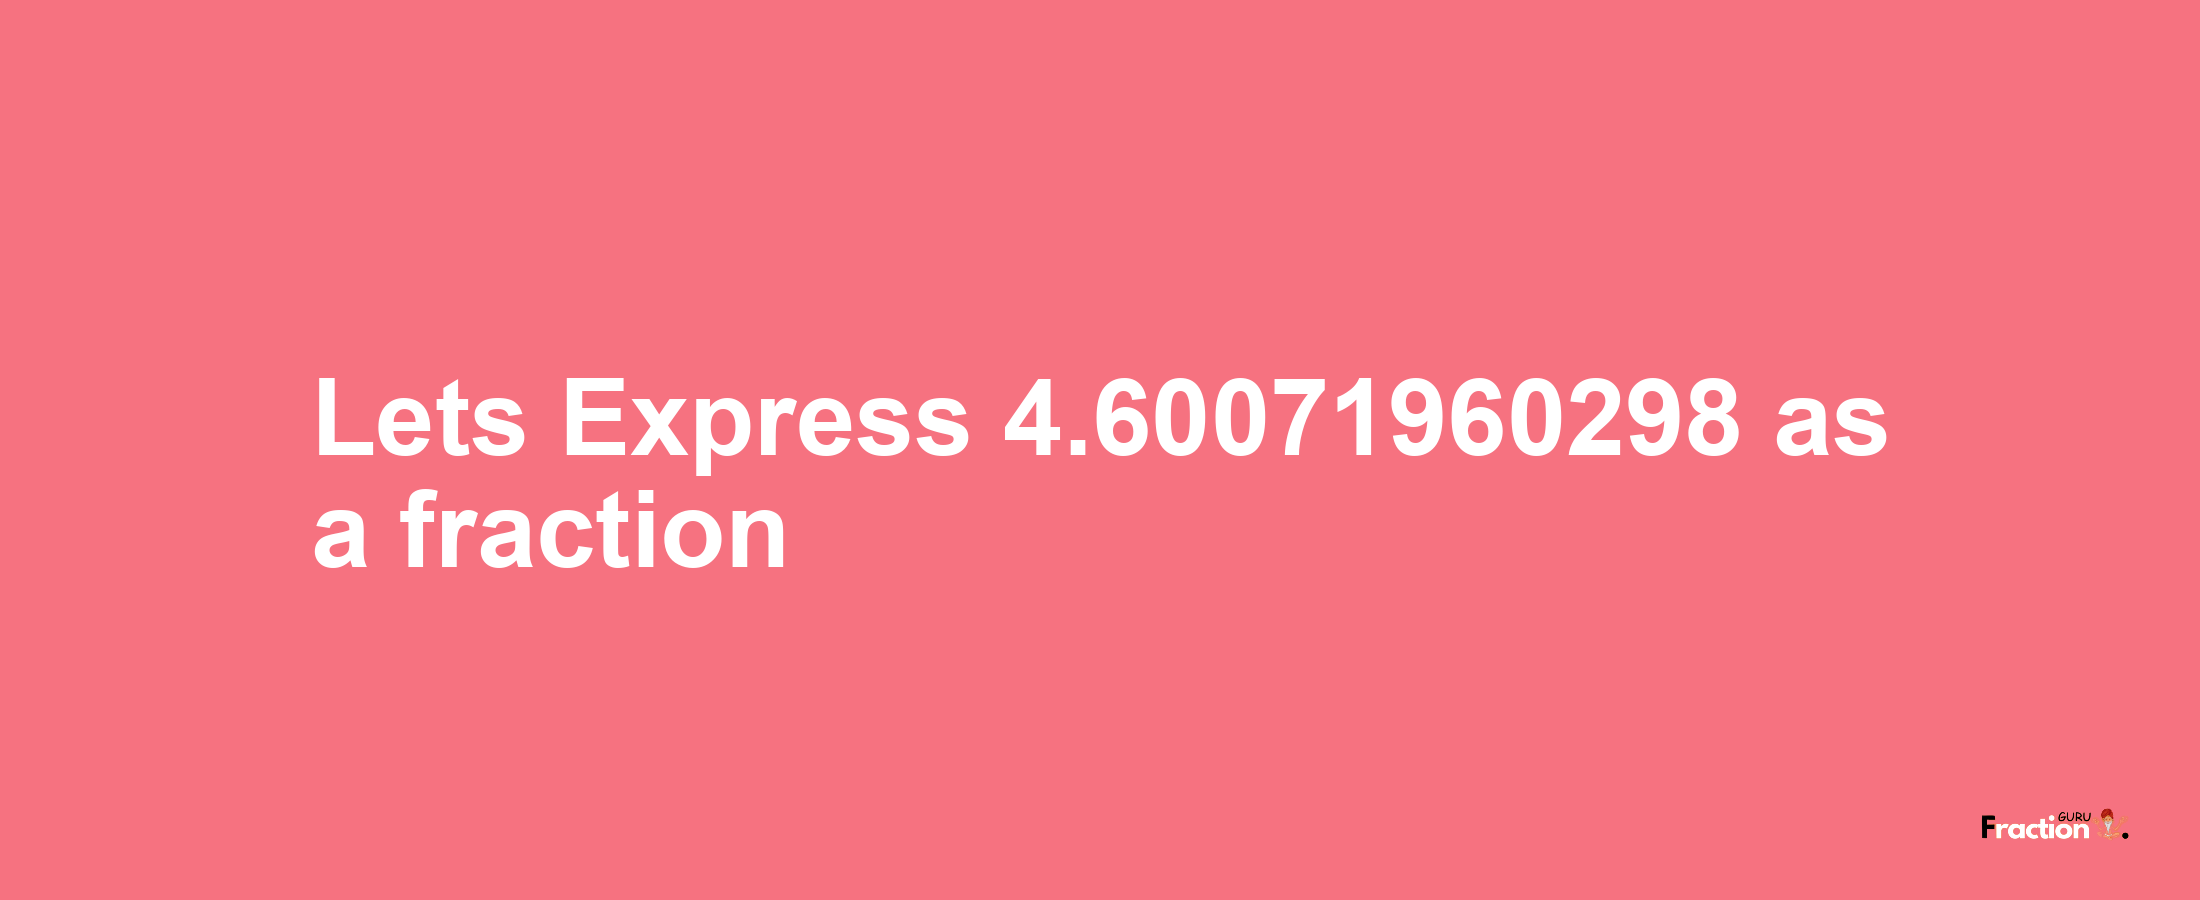 Lets Express 4.60071960298 as afraction